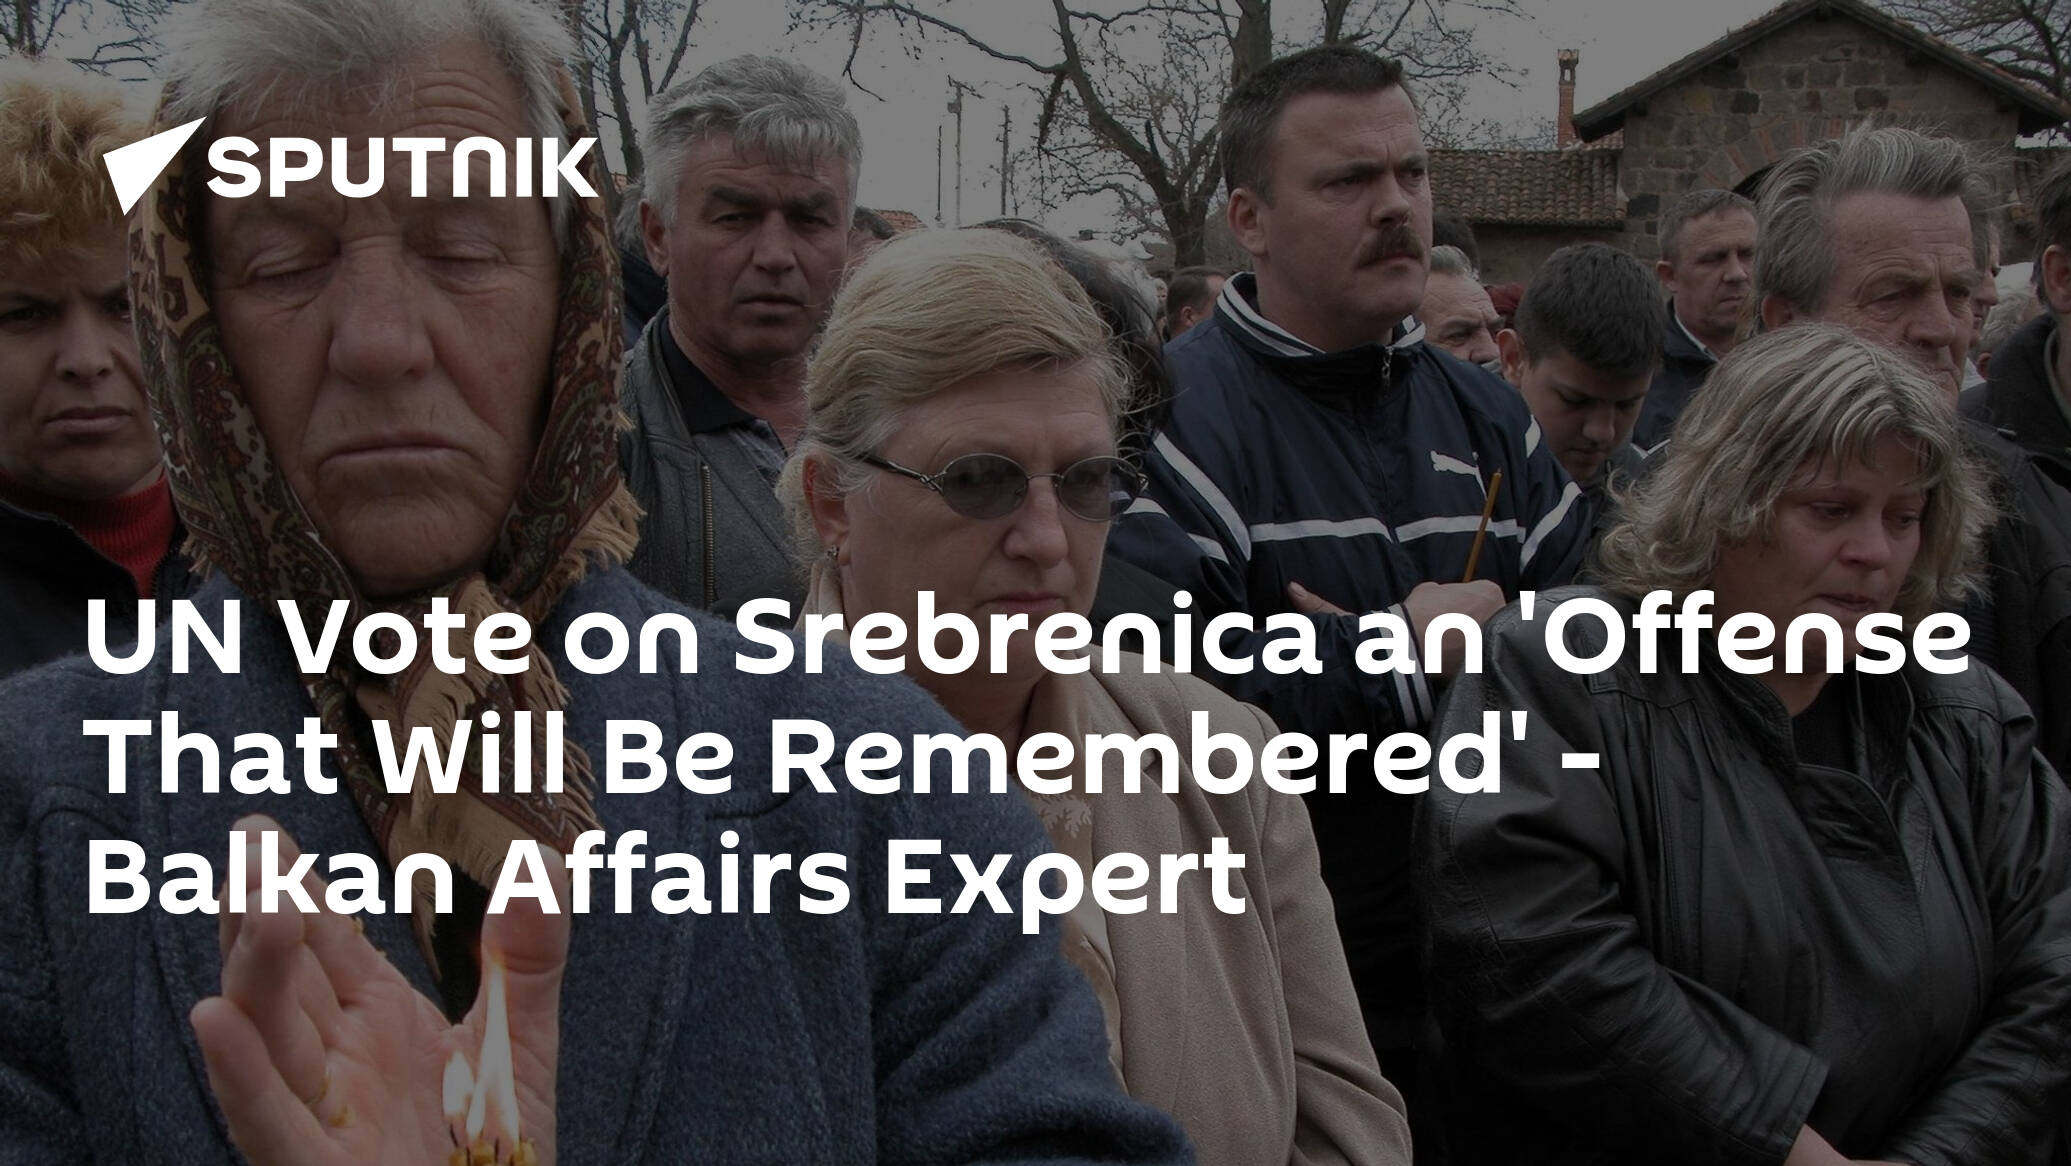 UN Vote on Srebrenica an 'Offense That Will Be Remembered'